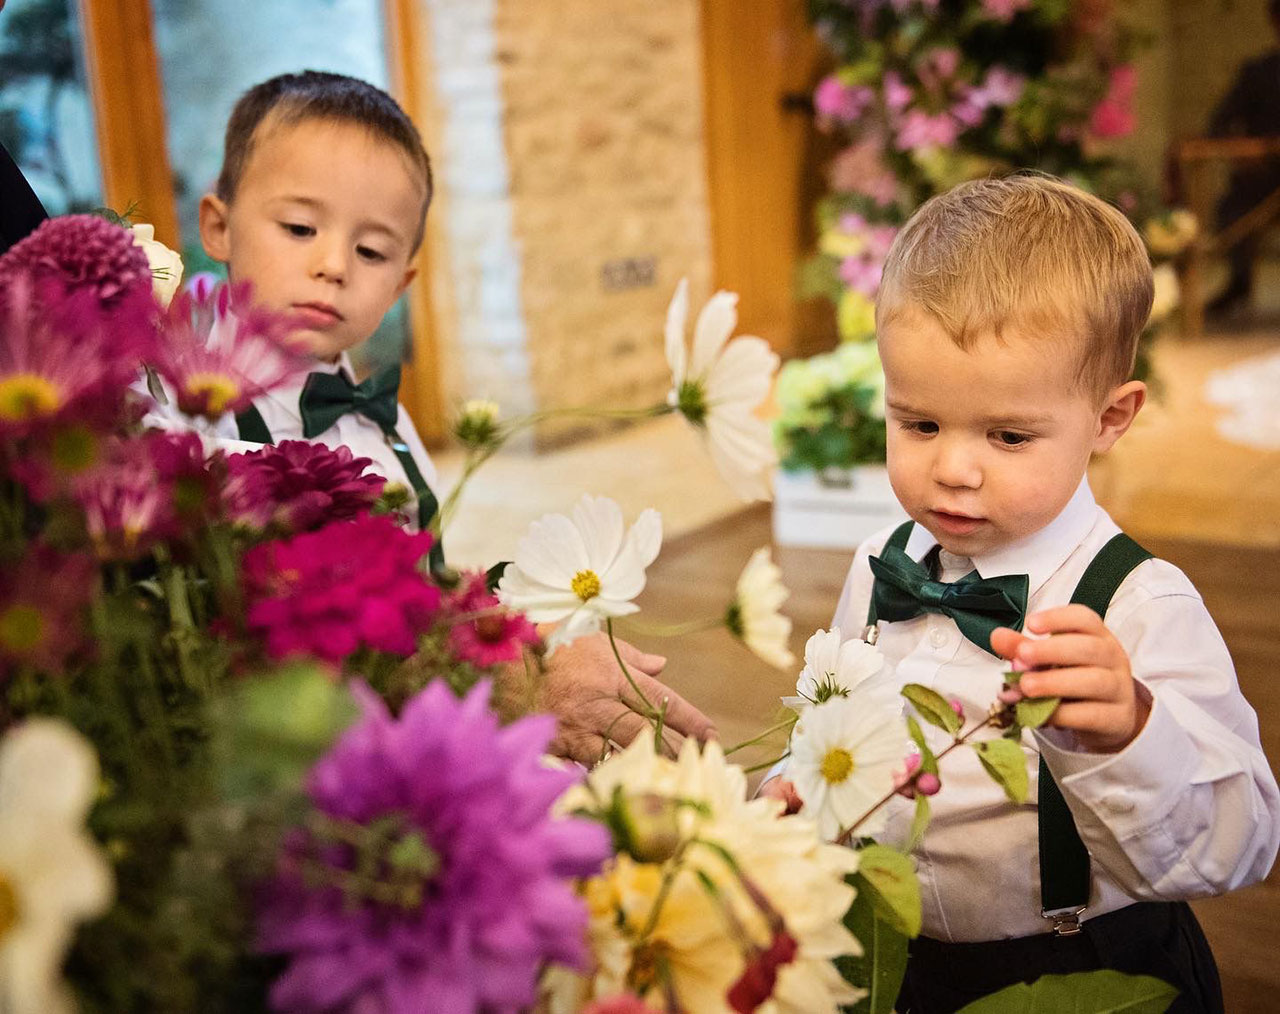 Page boys fascinated by wedding flowers